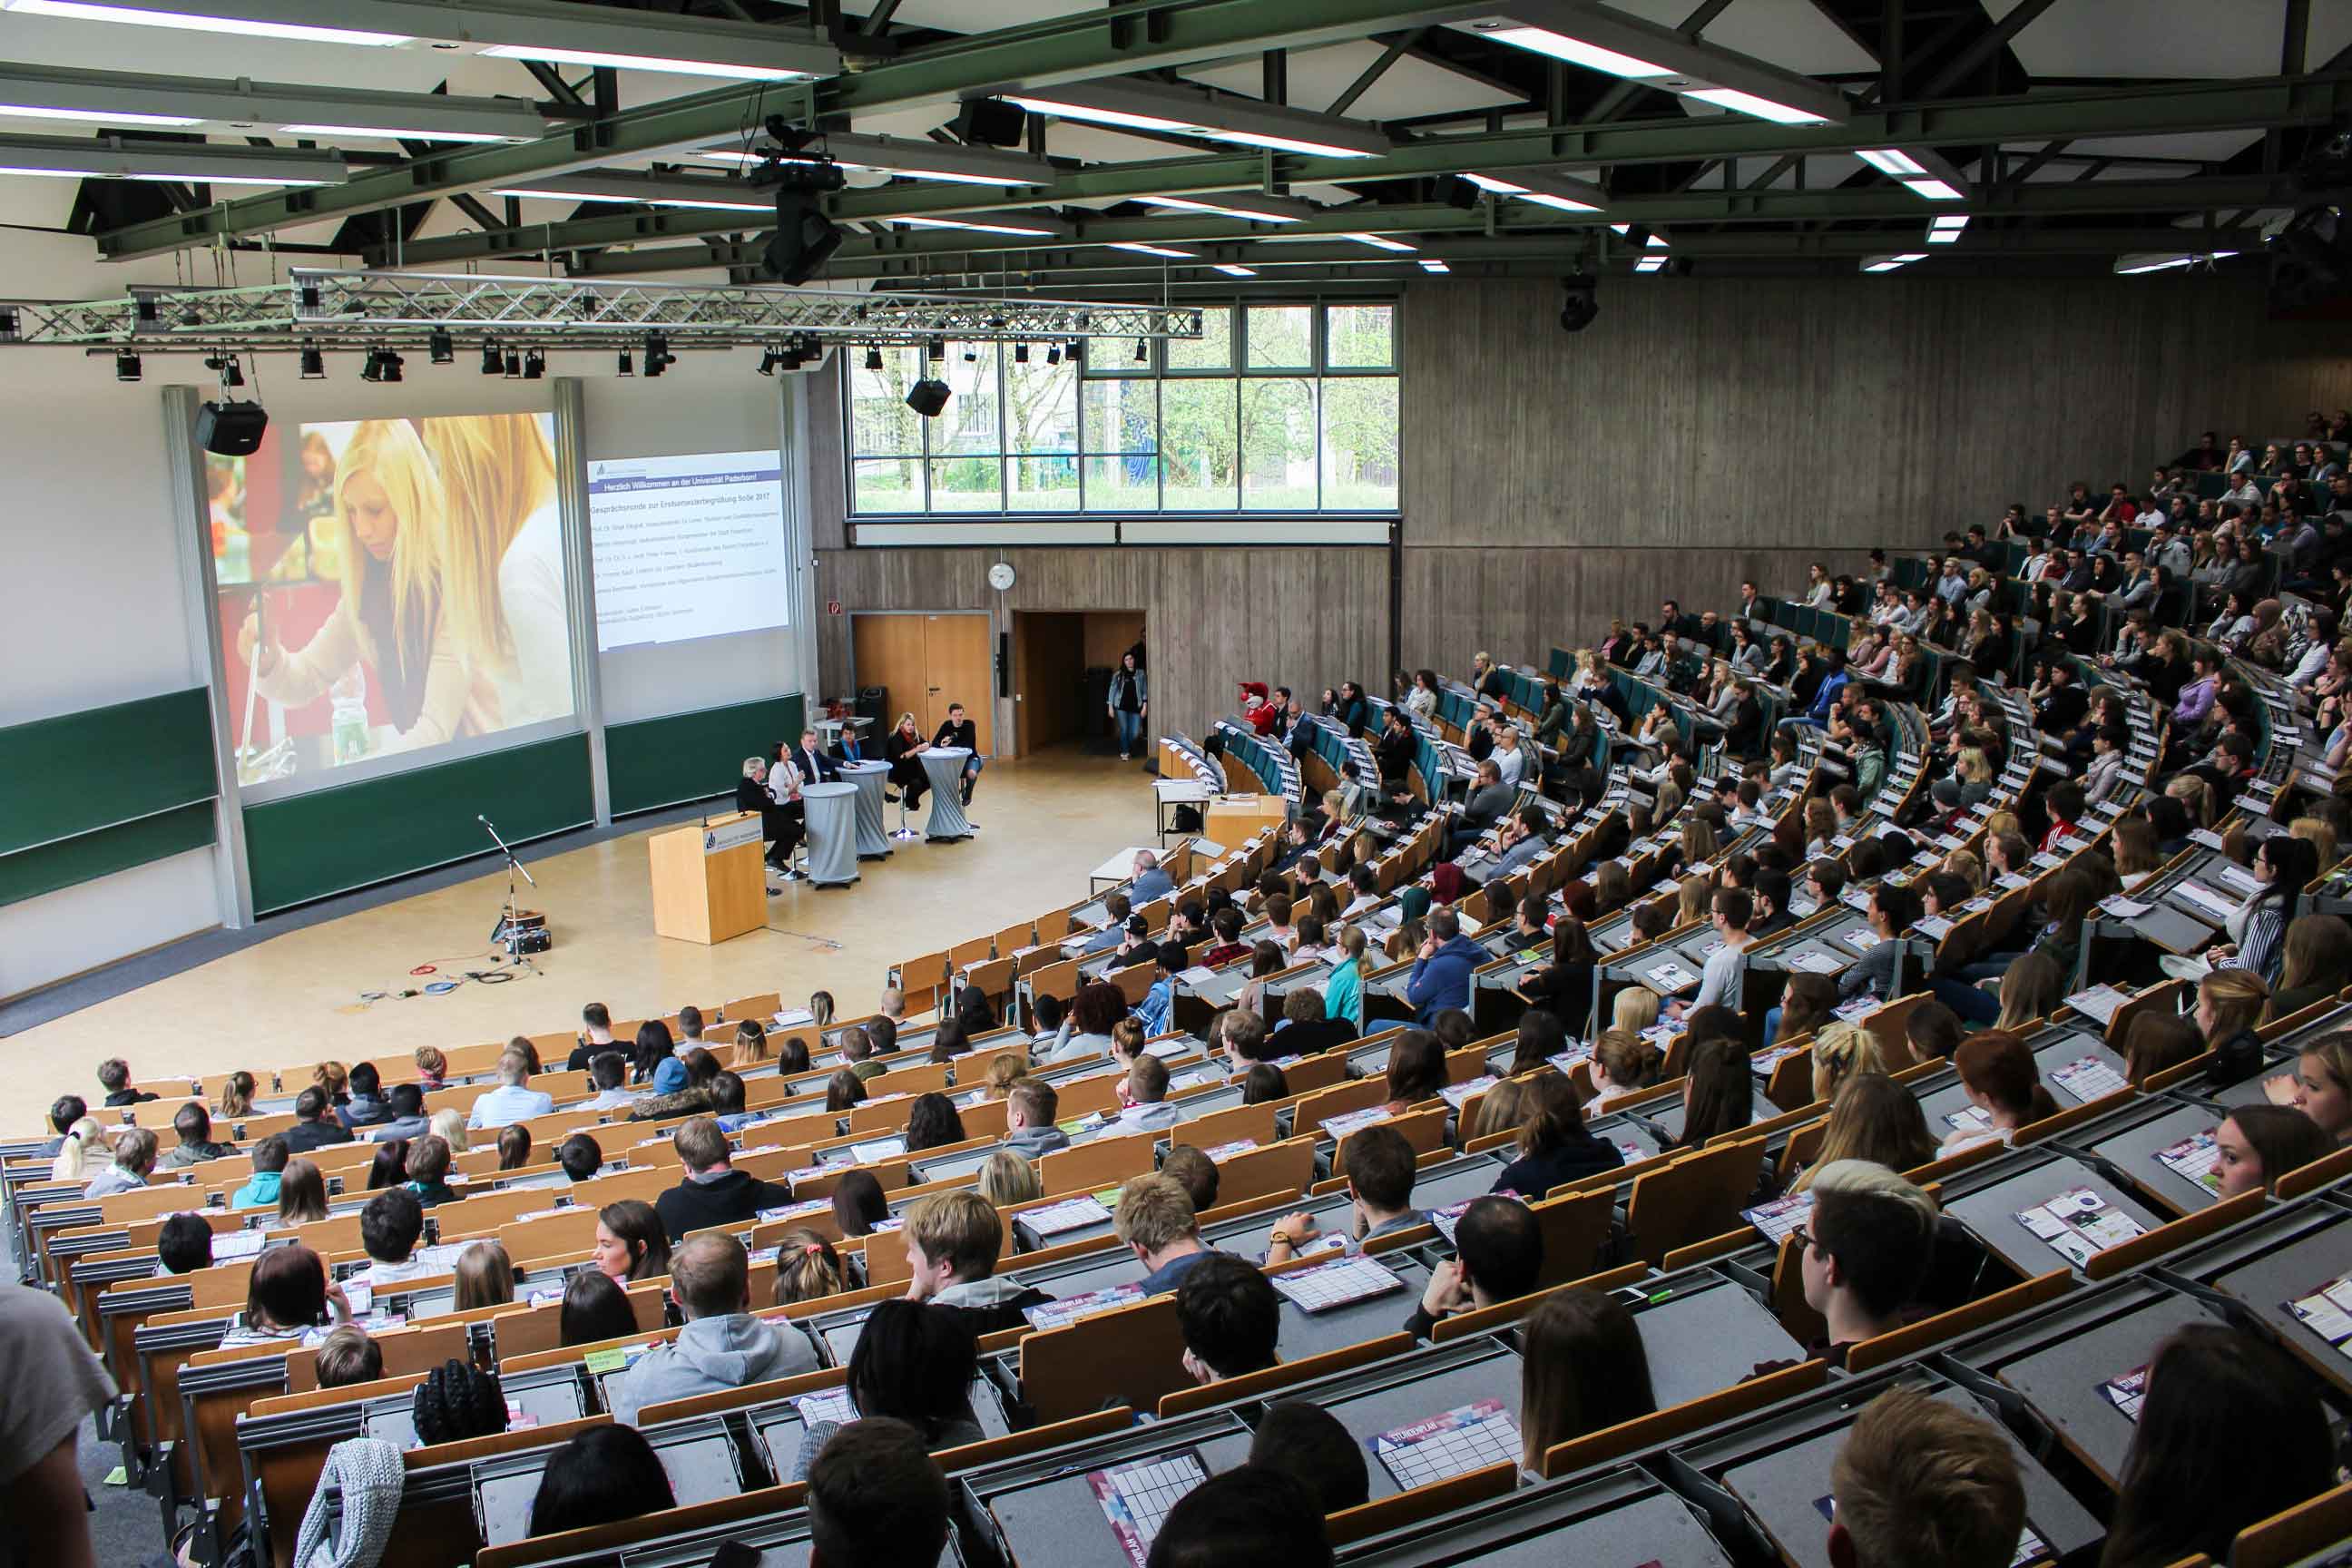 Lecture hall of a university with many students sitting on rows of benches